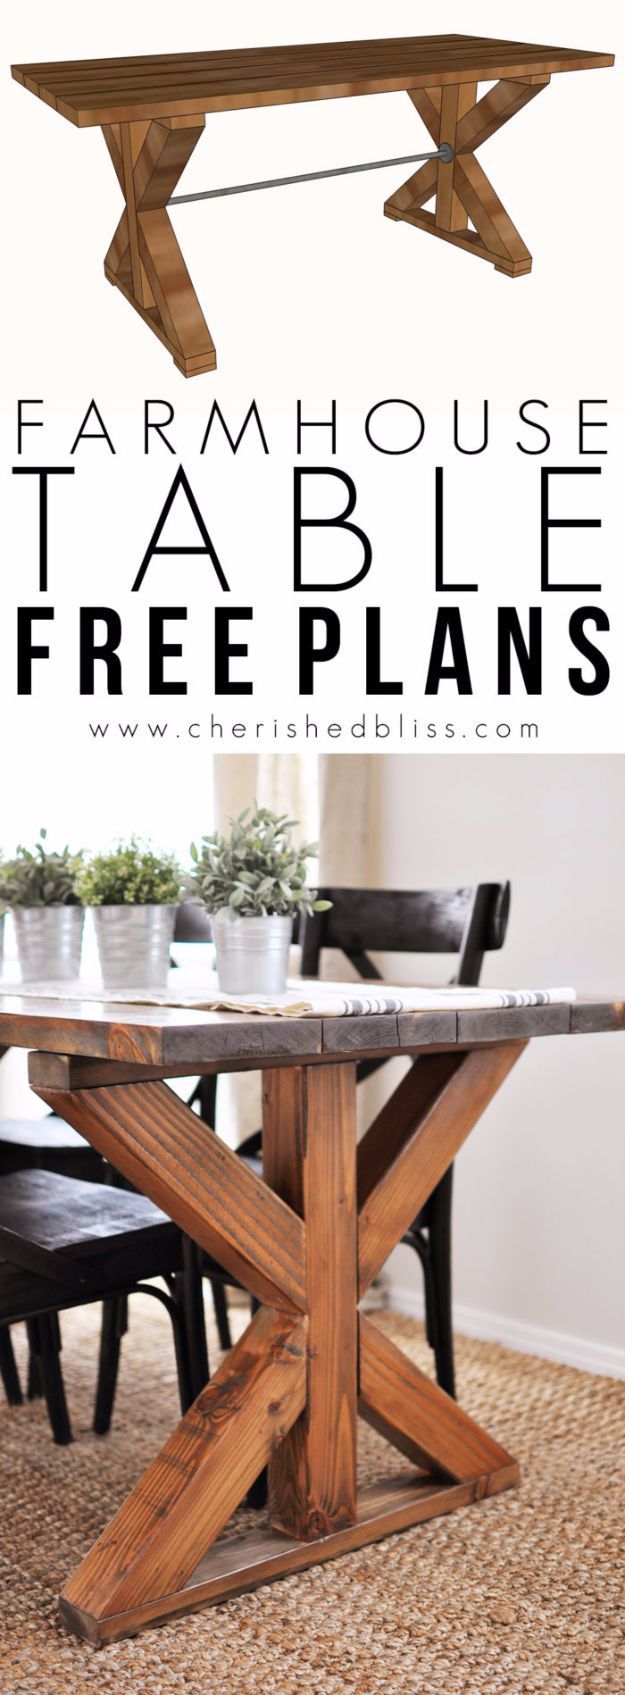 DIY Dining Room Table Projects – X Brace Farmhouse Table – Creative Do It Yourself Tables and Ideas You Can Make For Your Kitchen